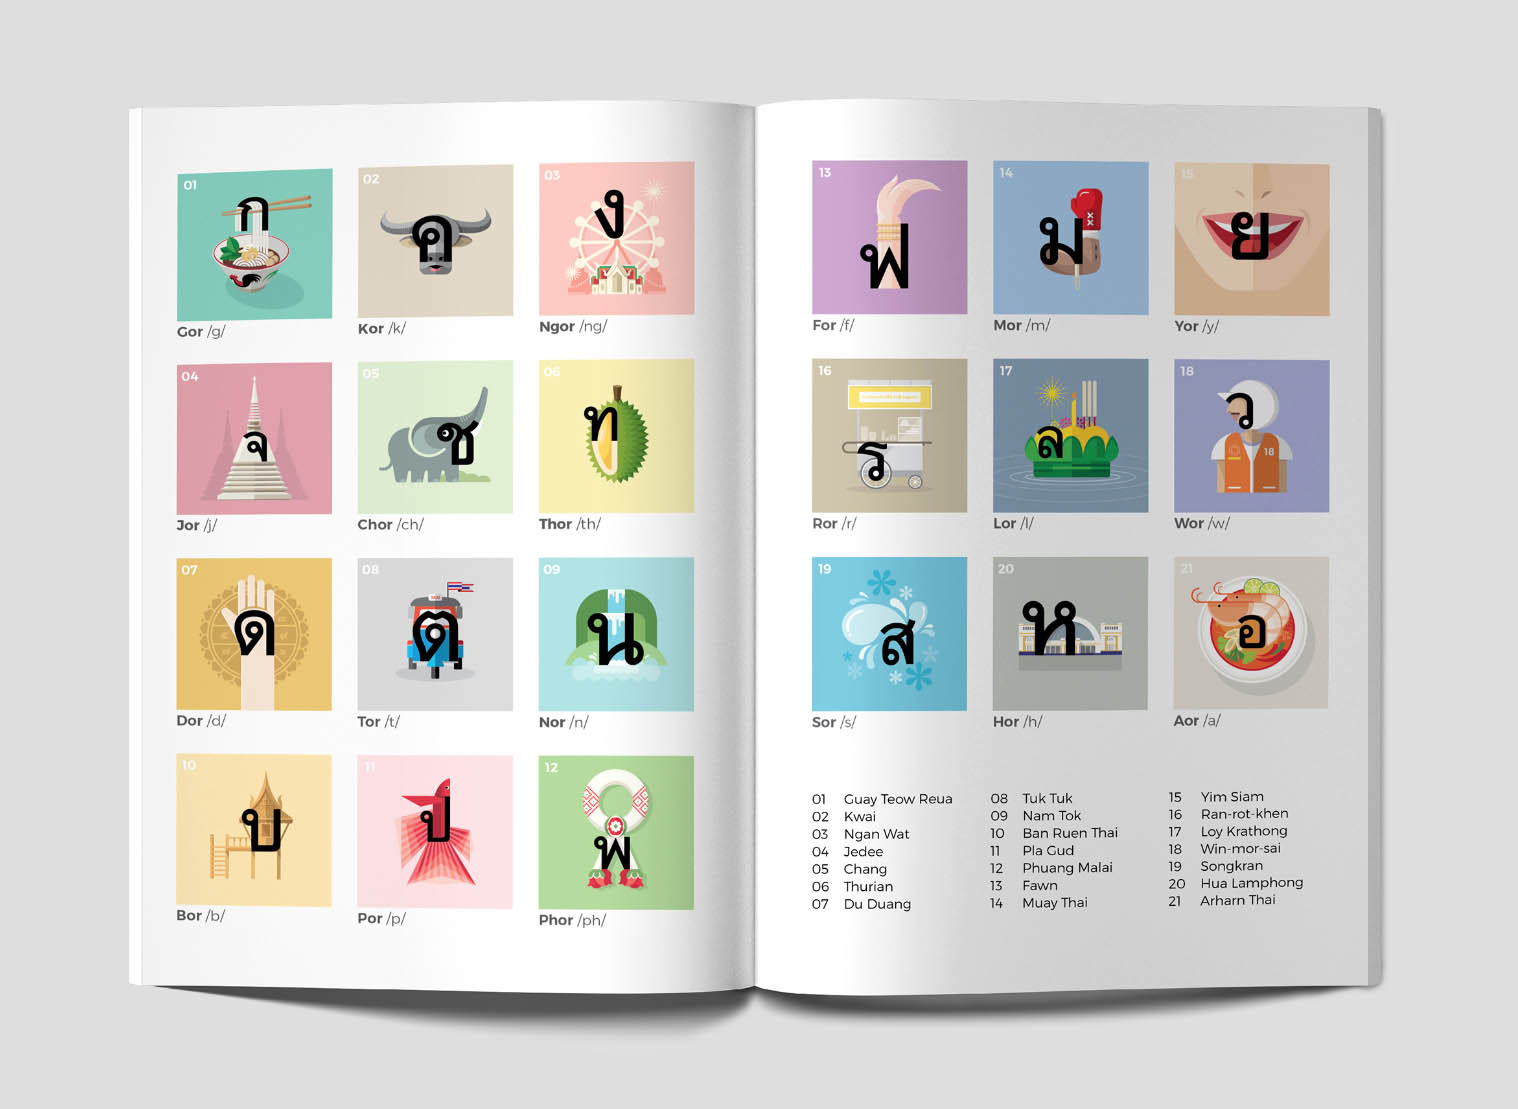 Double page spread spread for Culturalphabet, the book highlights the most commonly used Thai letters and brings them to life with attractive illustrations, to aid learning basic Thai in an easy and engaging way